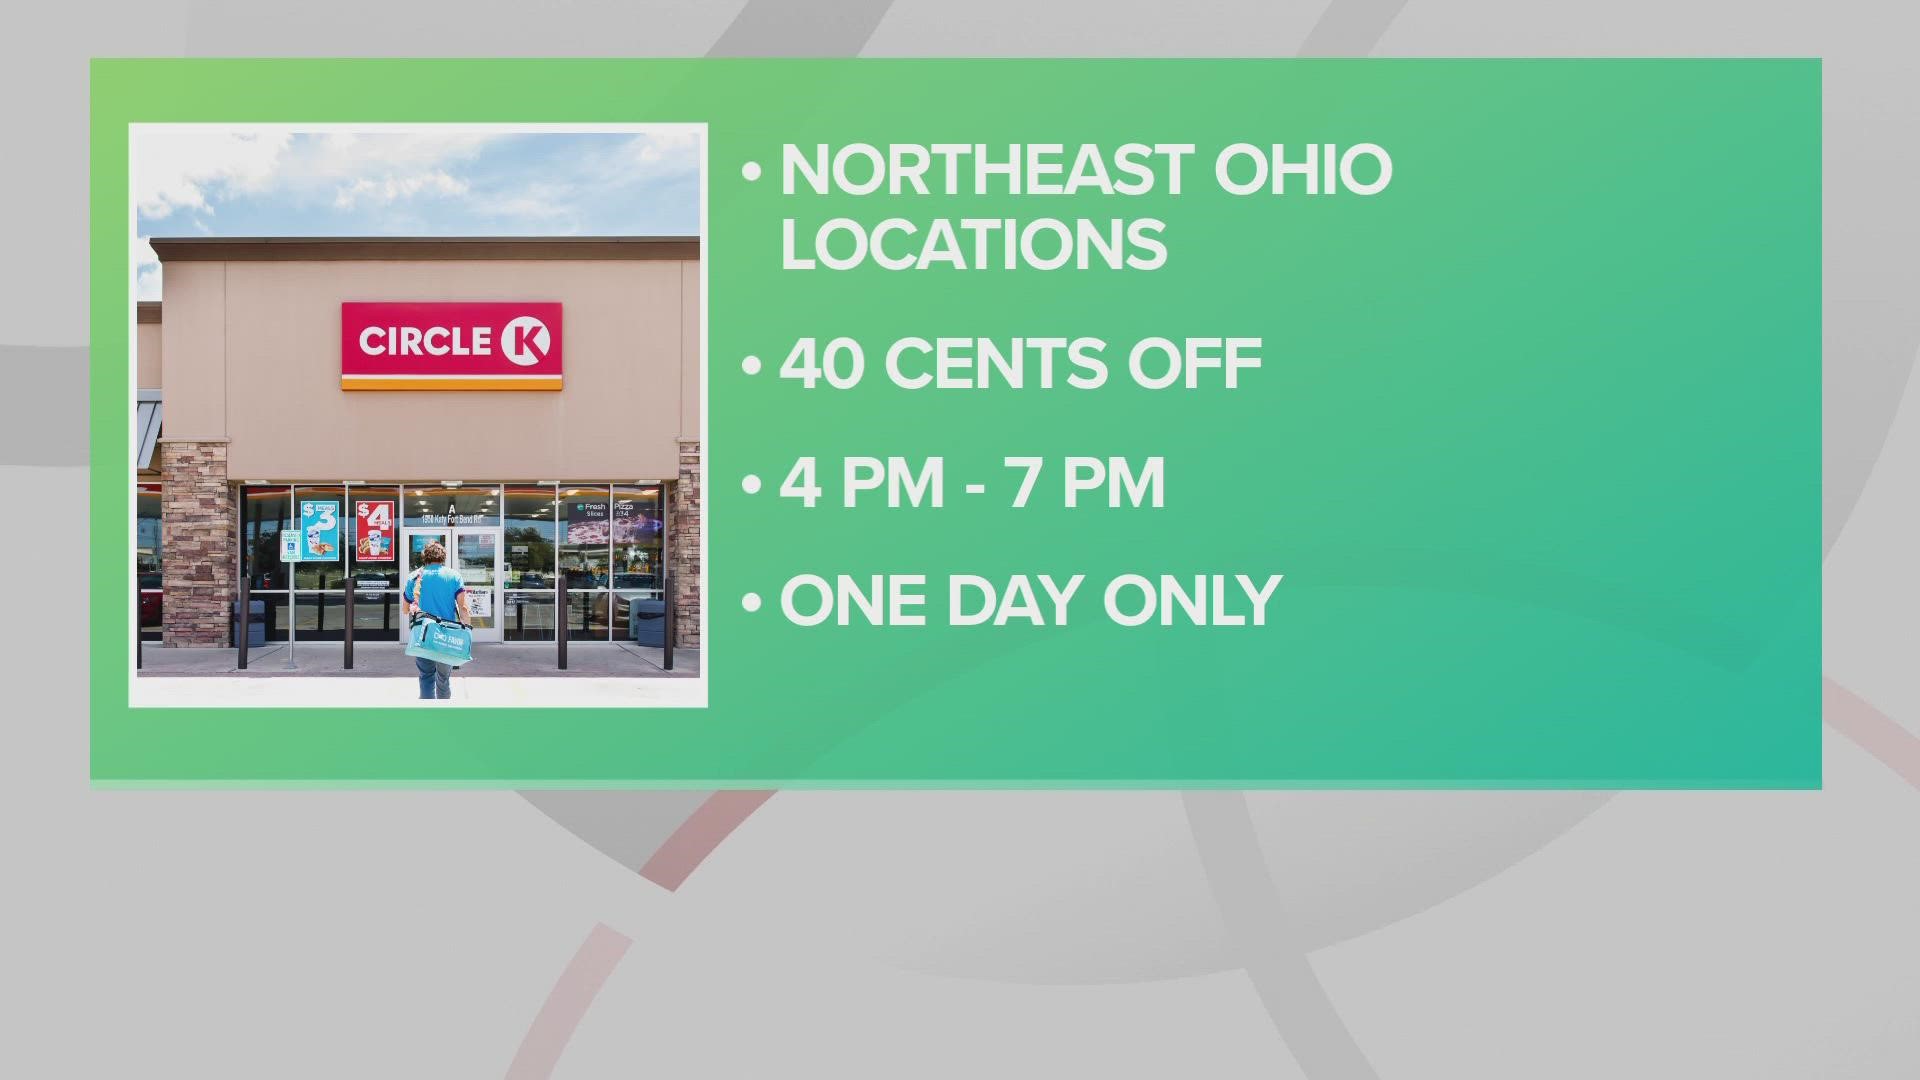 The discount on Circle K-branded fuel will take place between 4 and 7 p.m. at participating locations.